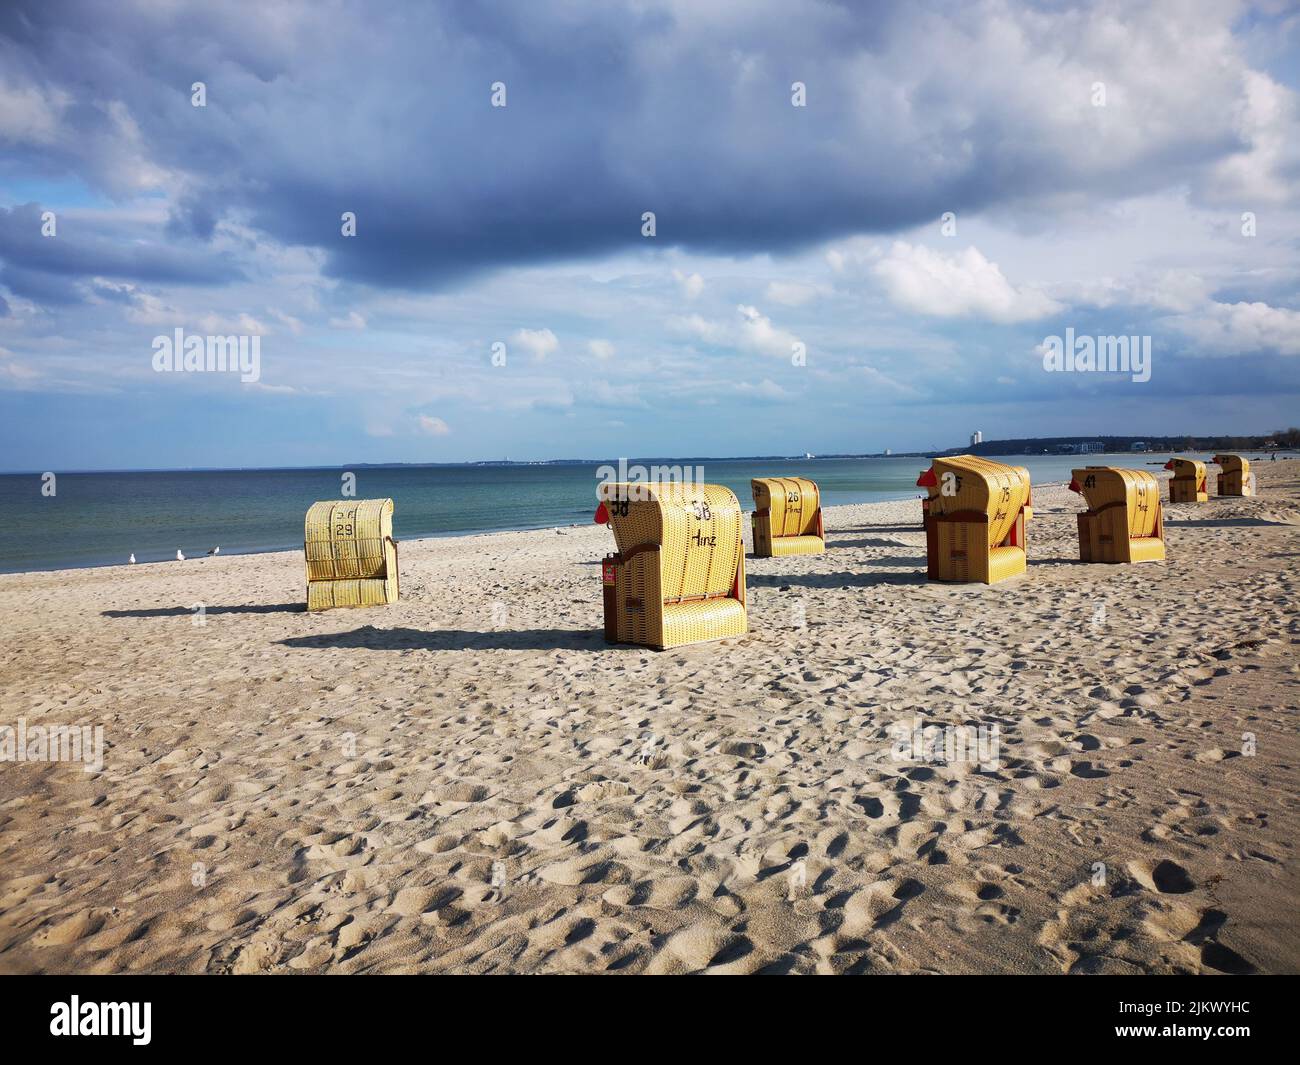 A scenic view of benches on the sandy beach against a blue seascape under a cloudy sky on a sunny day Stock Photo